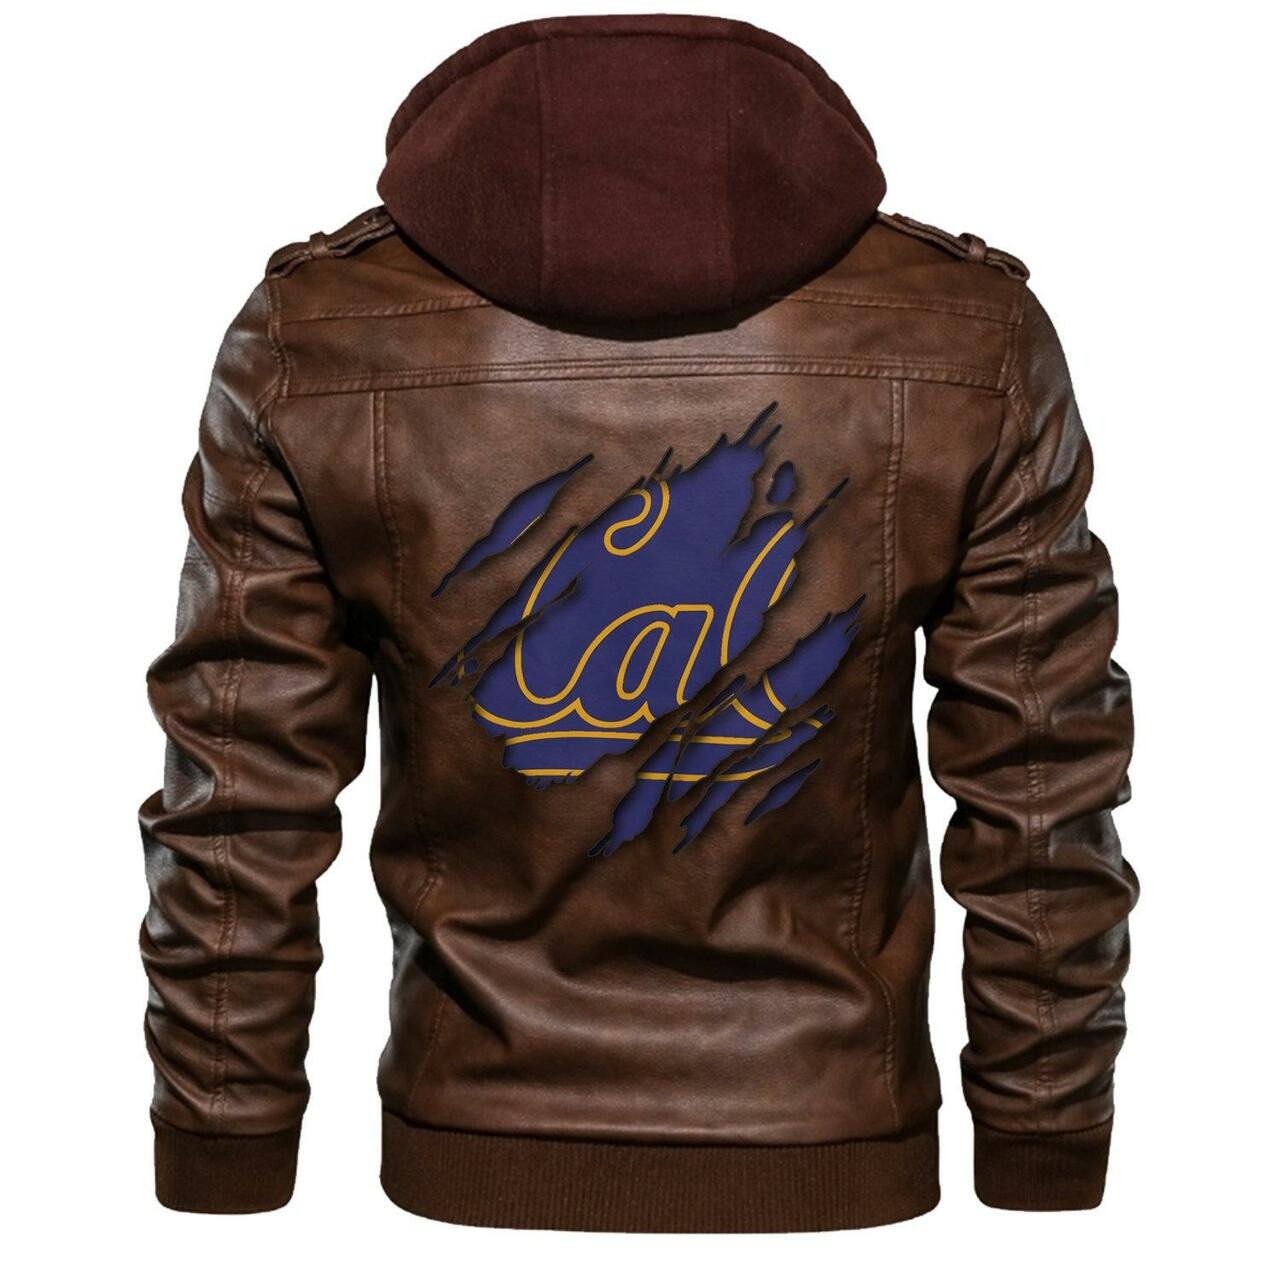 Are you looking for a great leather jacket? 145